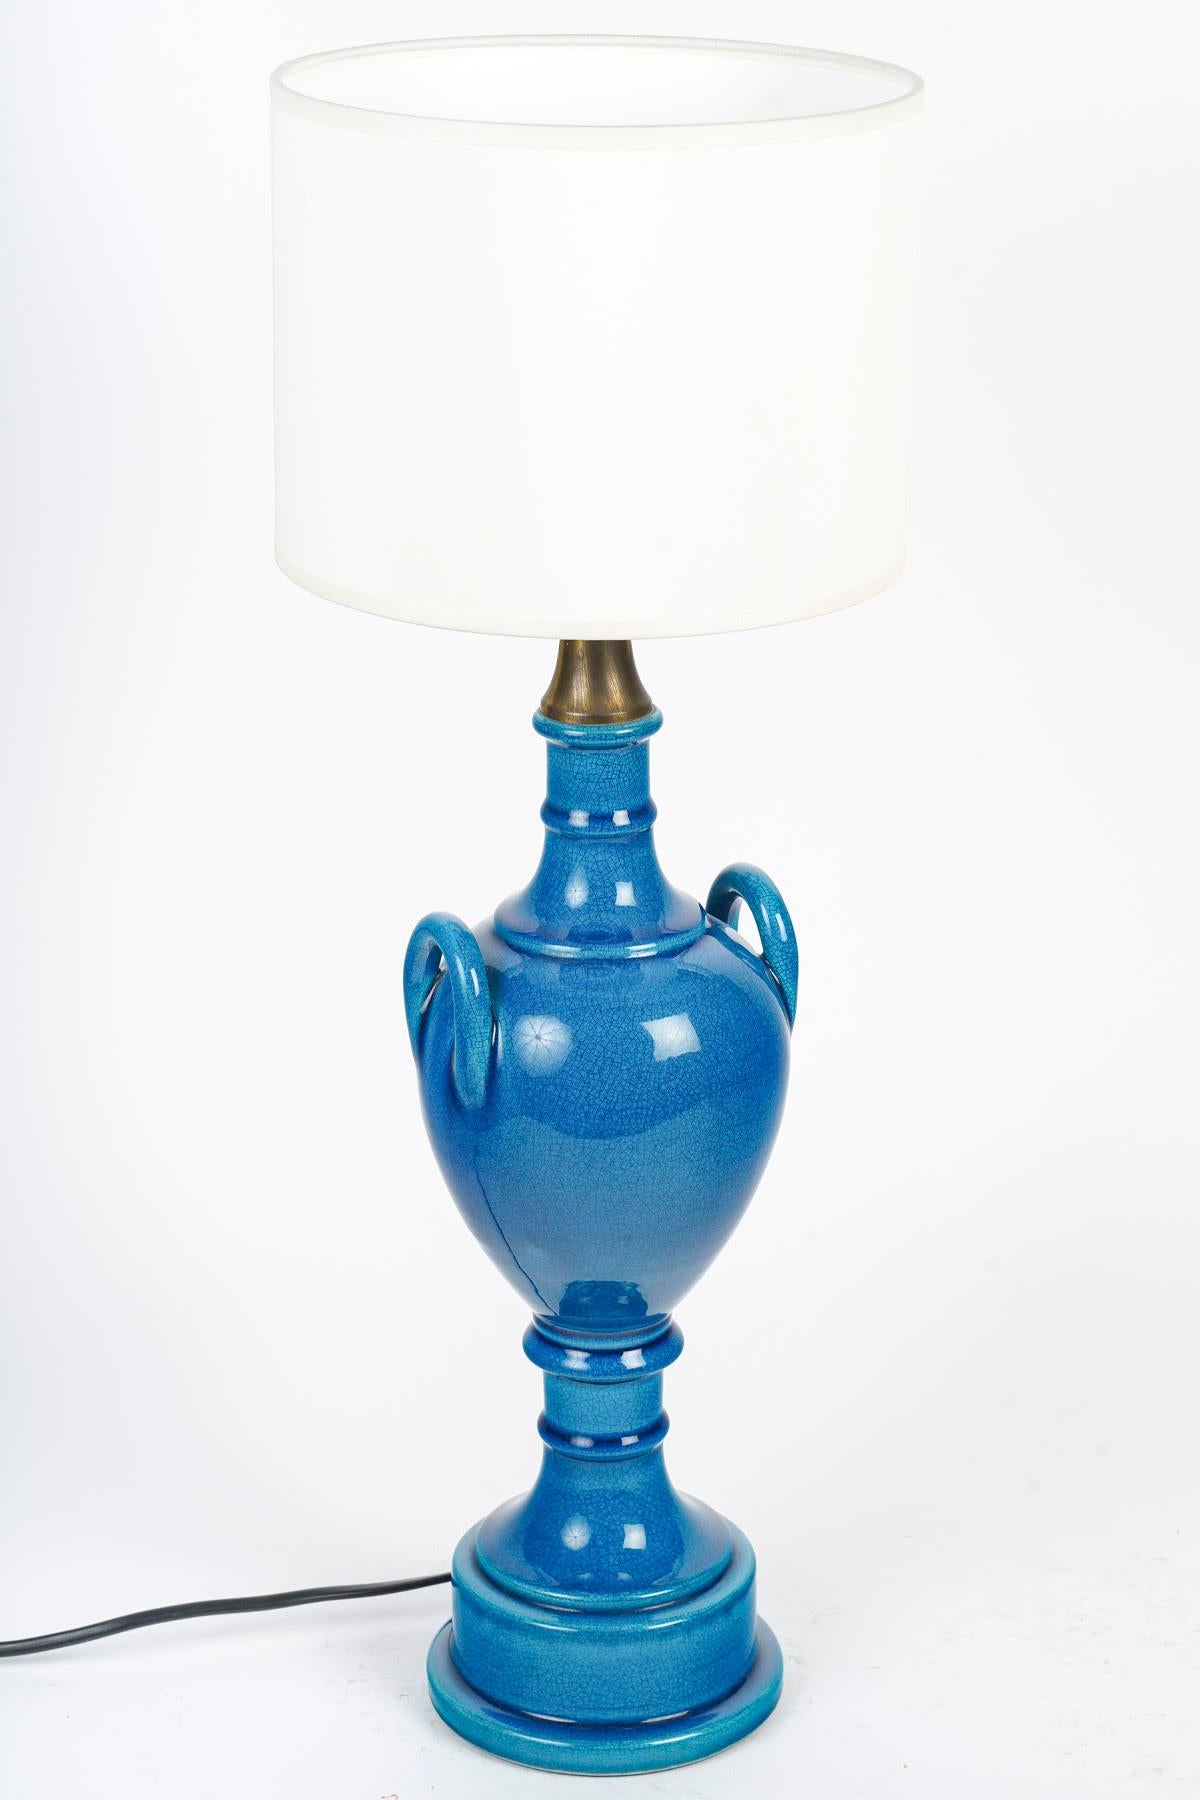 Pair of table lamps by Pol Chambost (1906-1983), Blue glazed earthenware.

Pair of 20th century blue enamelled porcelain table lamps by Pol Chambost (1906-1983), signed.
Excluding shade: h: 36cm, d: 12.5cm